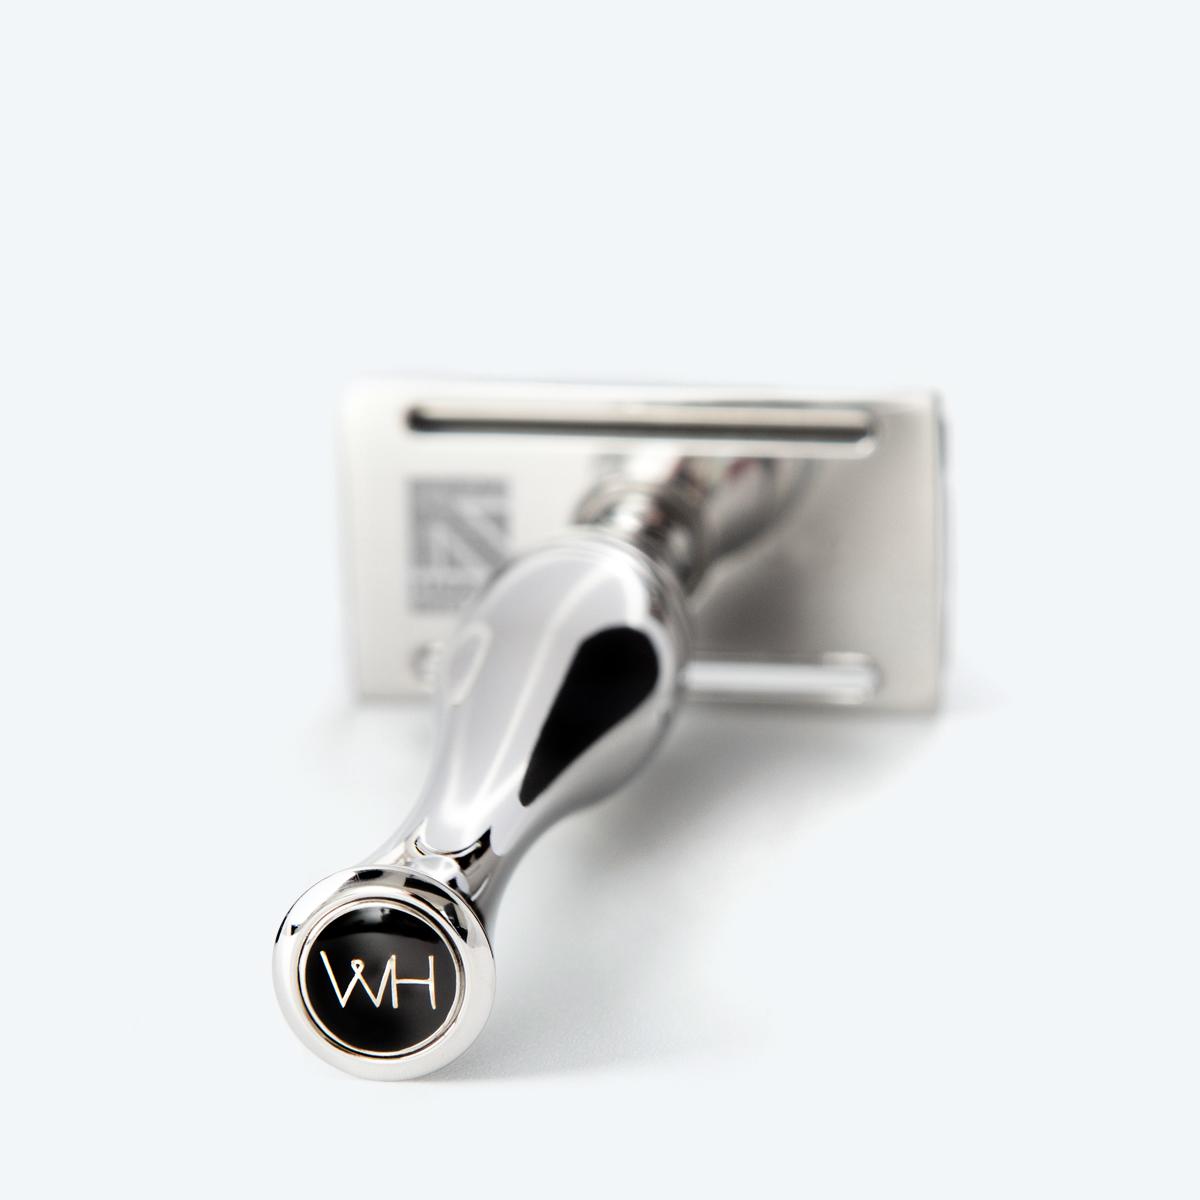 stainless steel safety razor made in britain